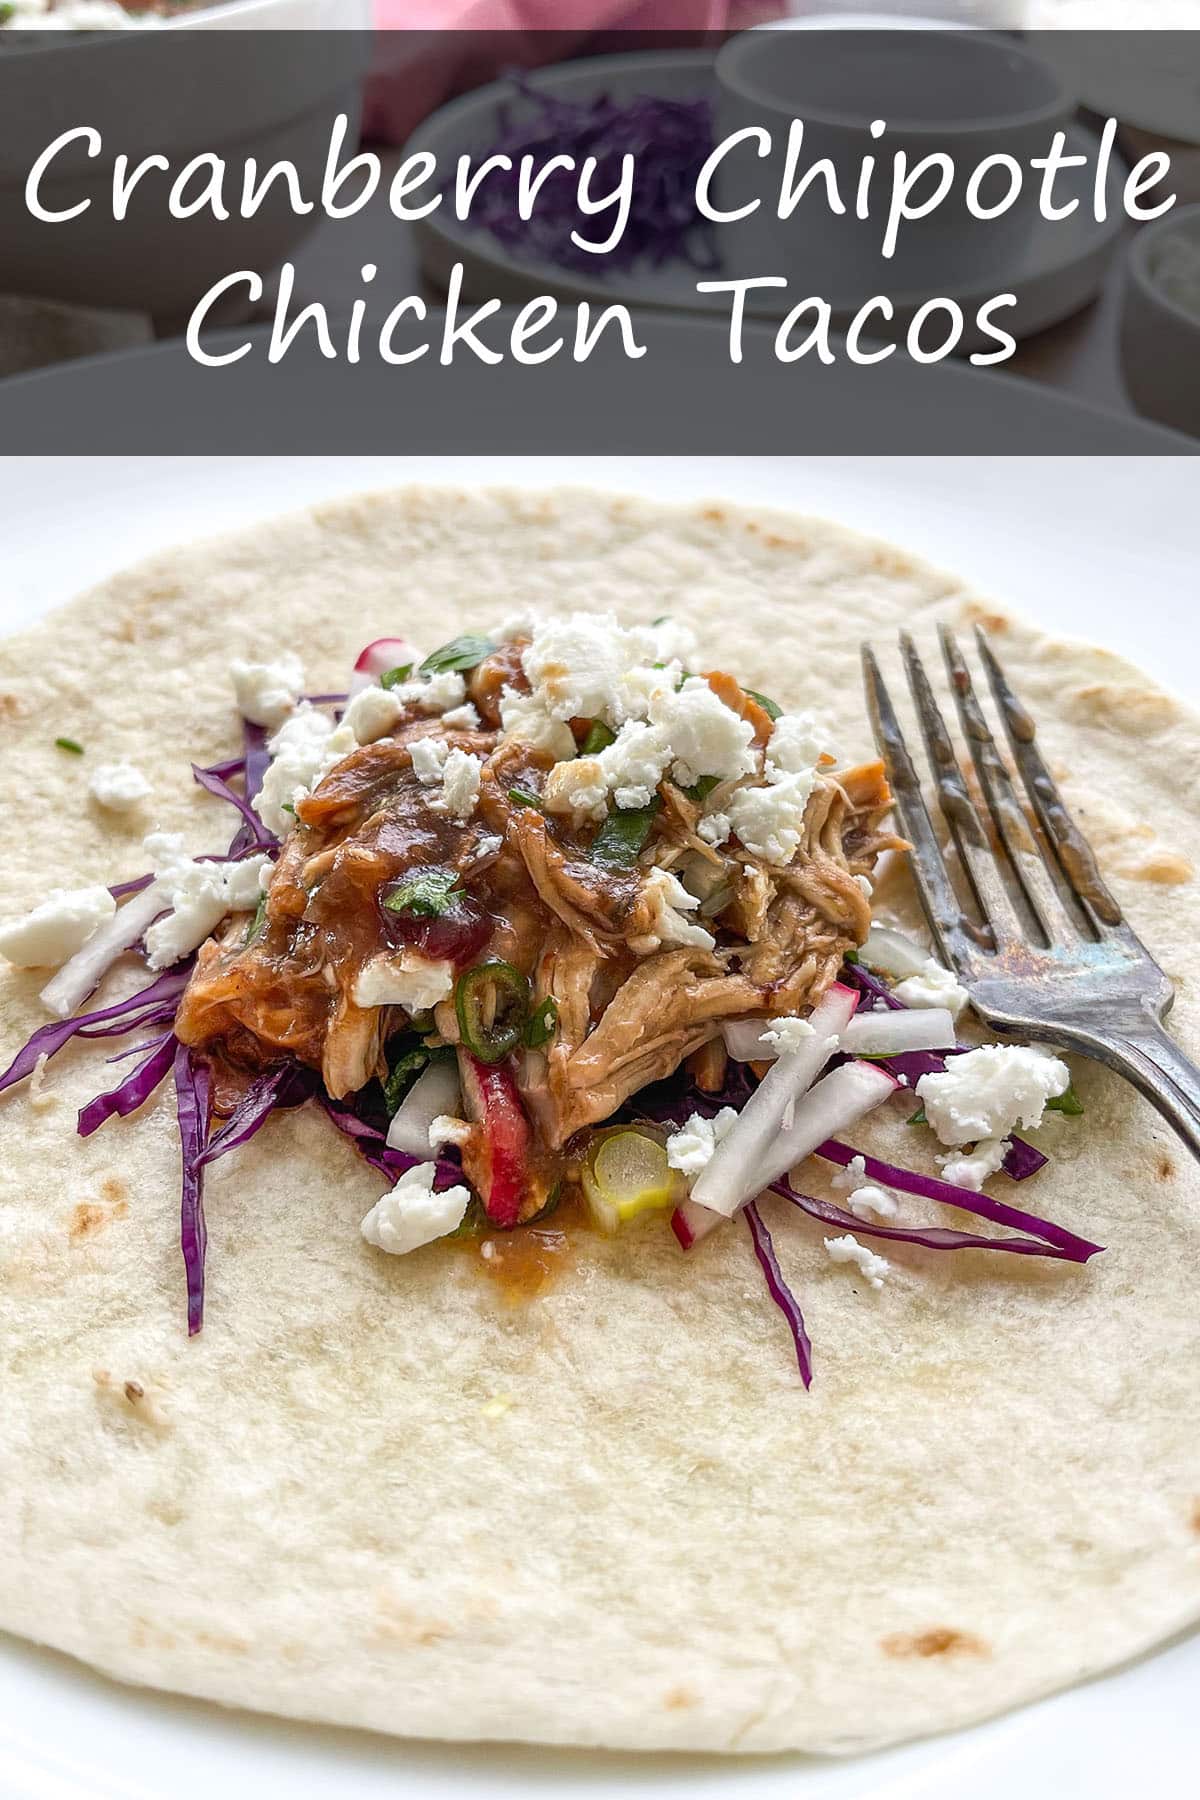 Cranberry Chipotle Pulled Chicken Tacos